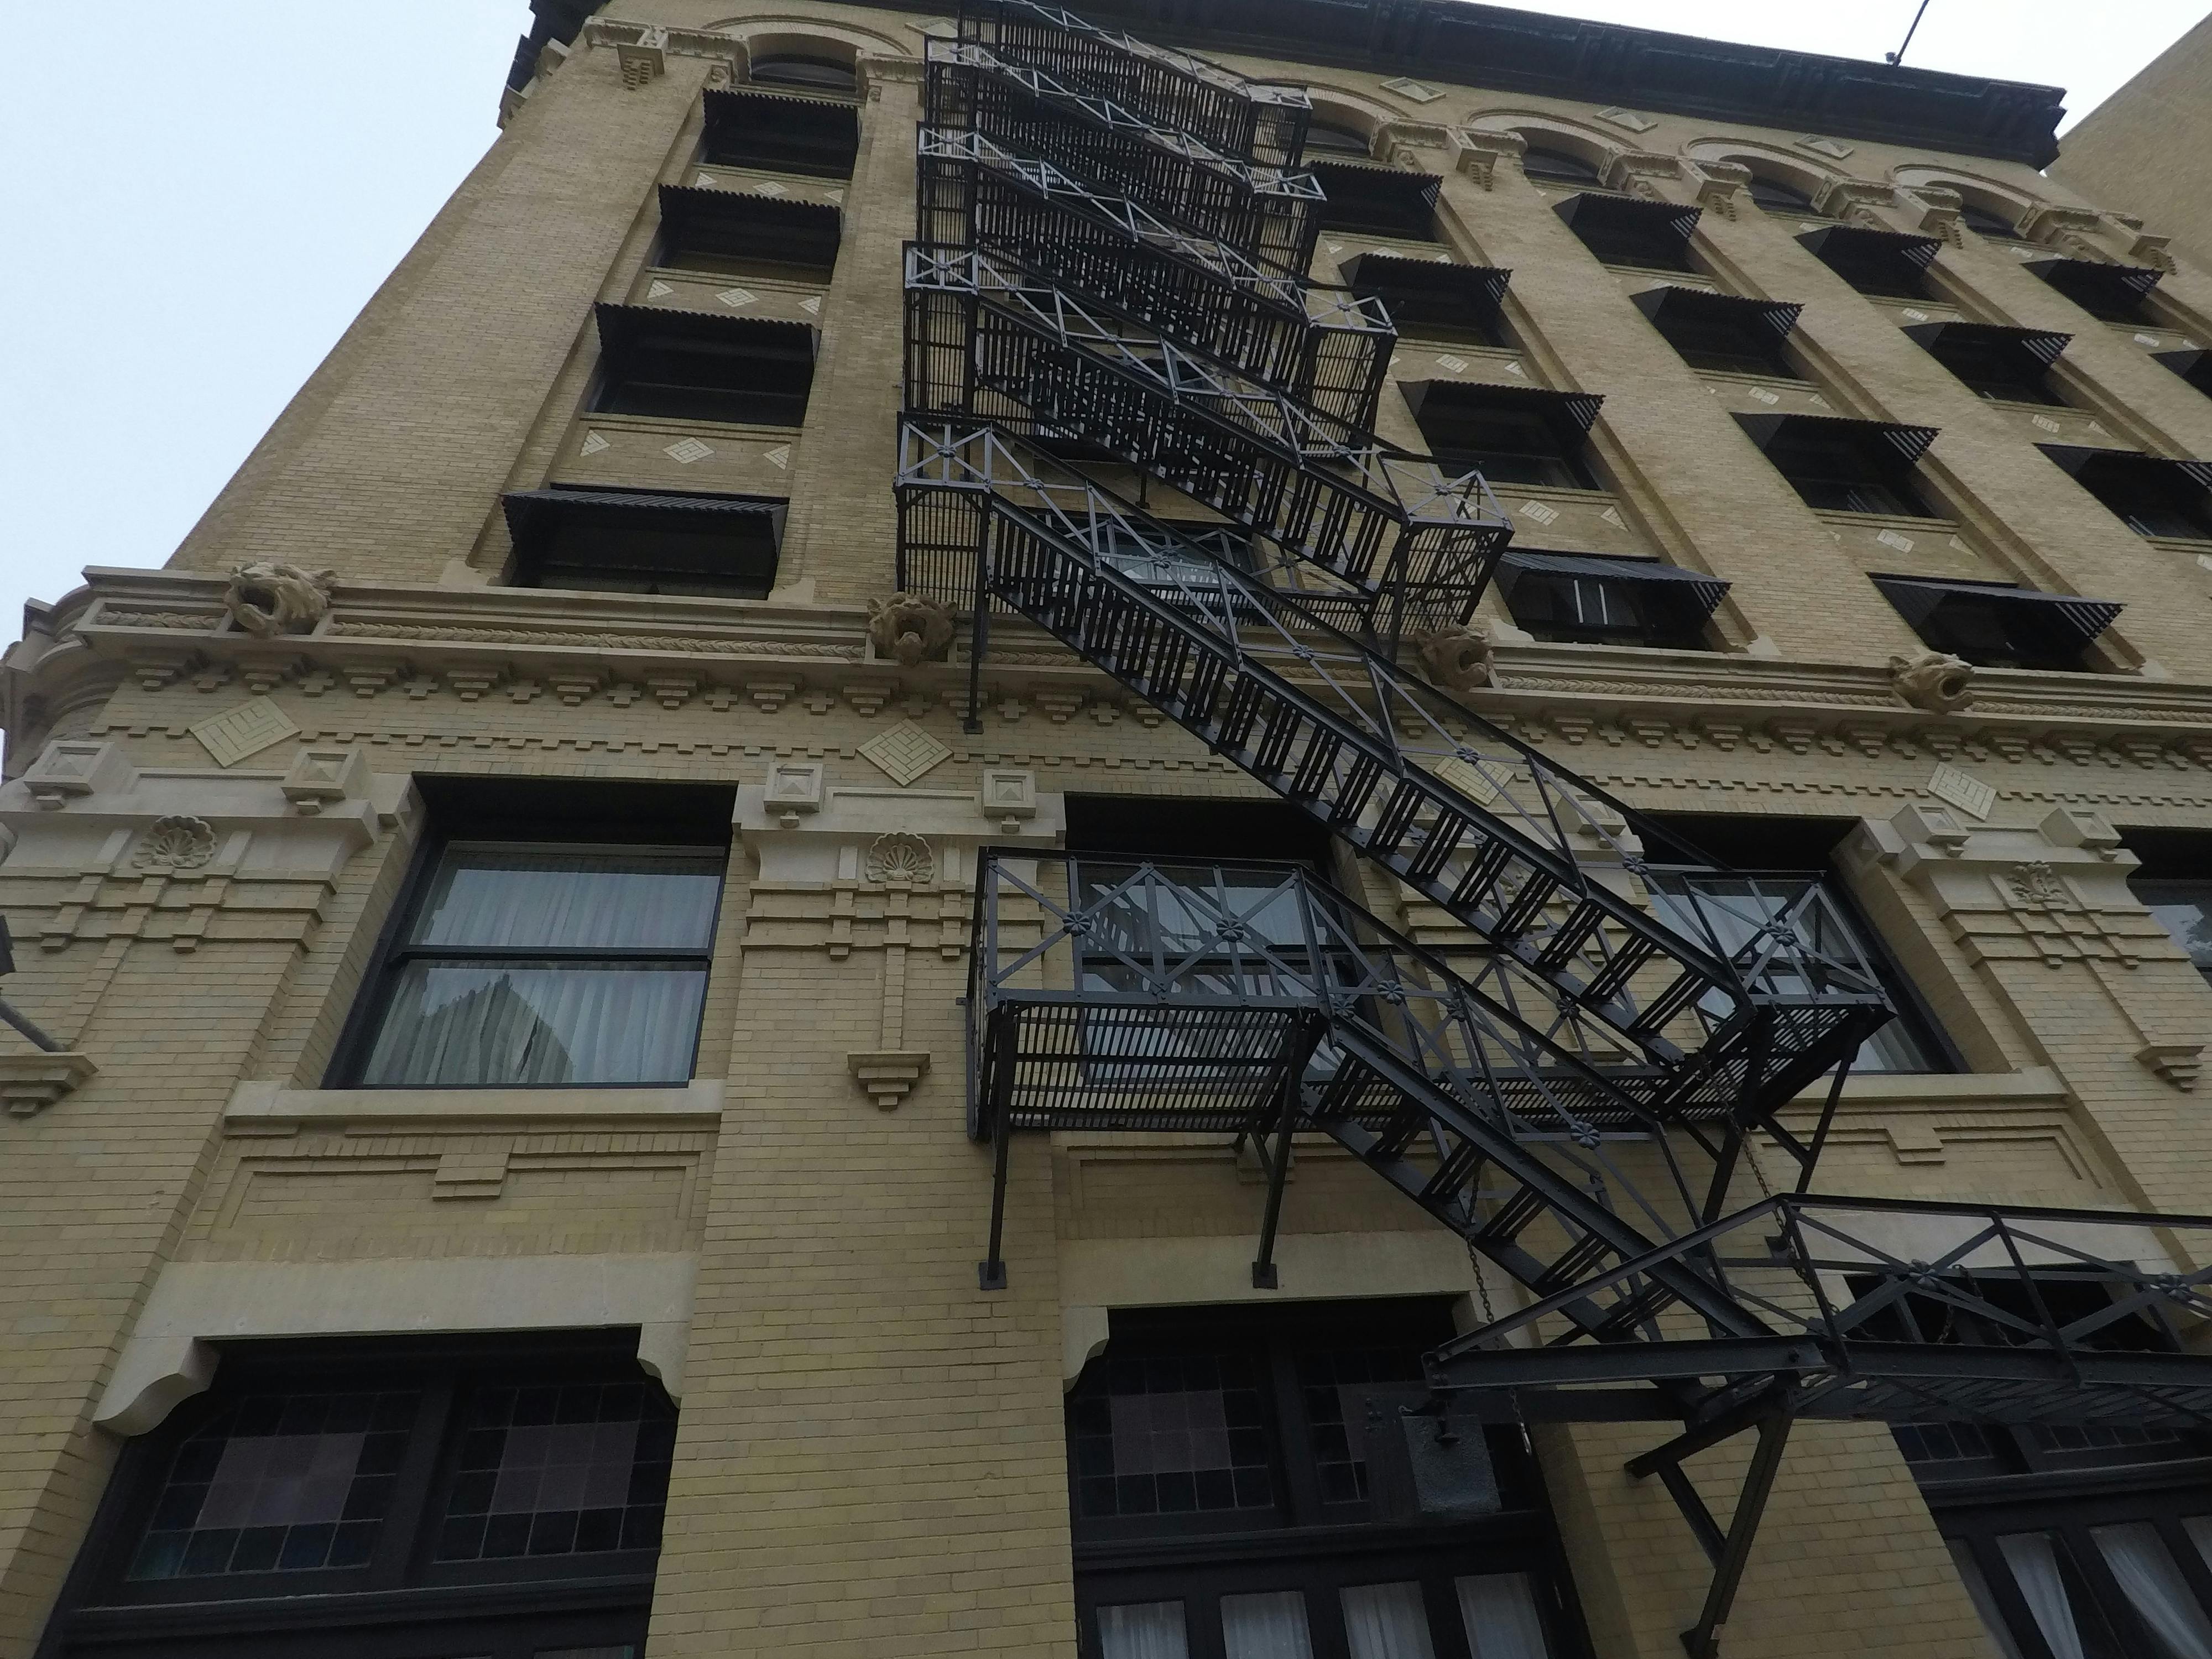 Free stock photo of architecture, fire escape, old building